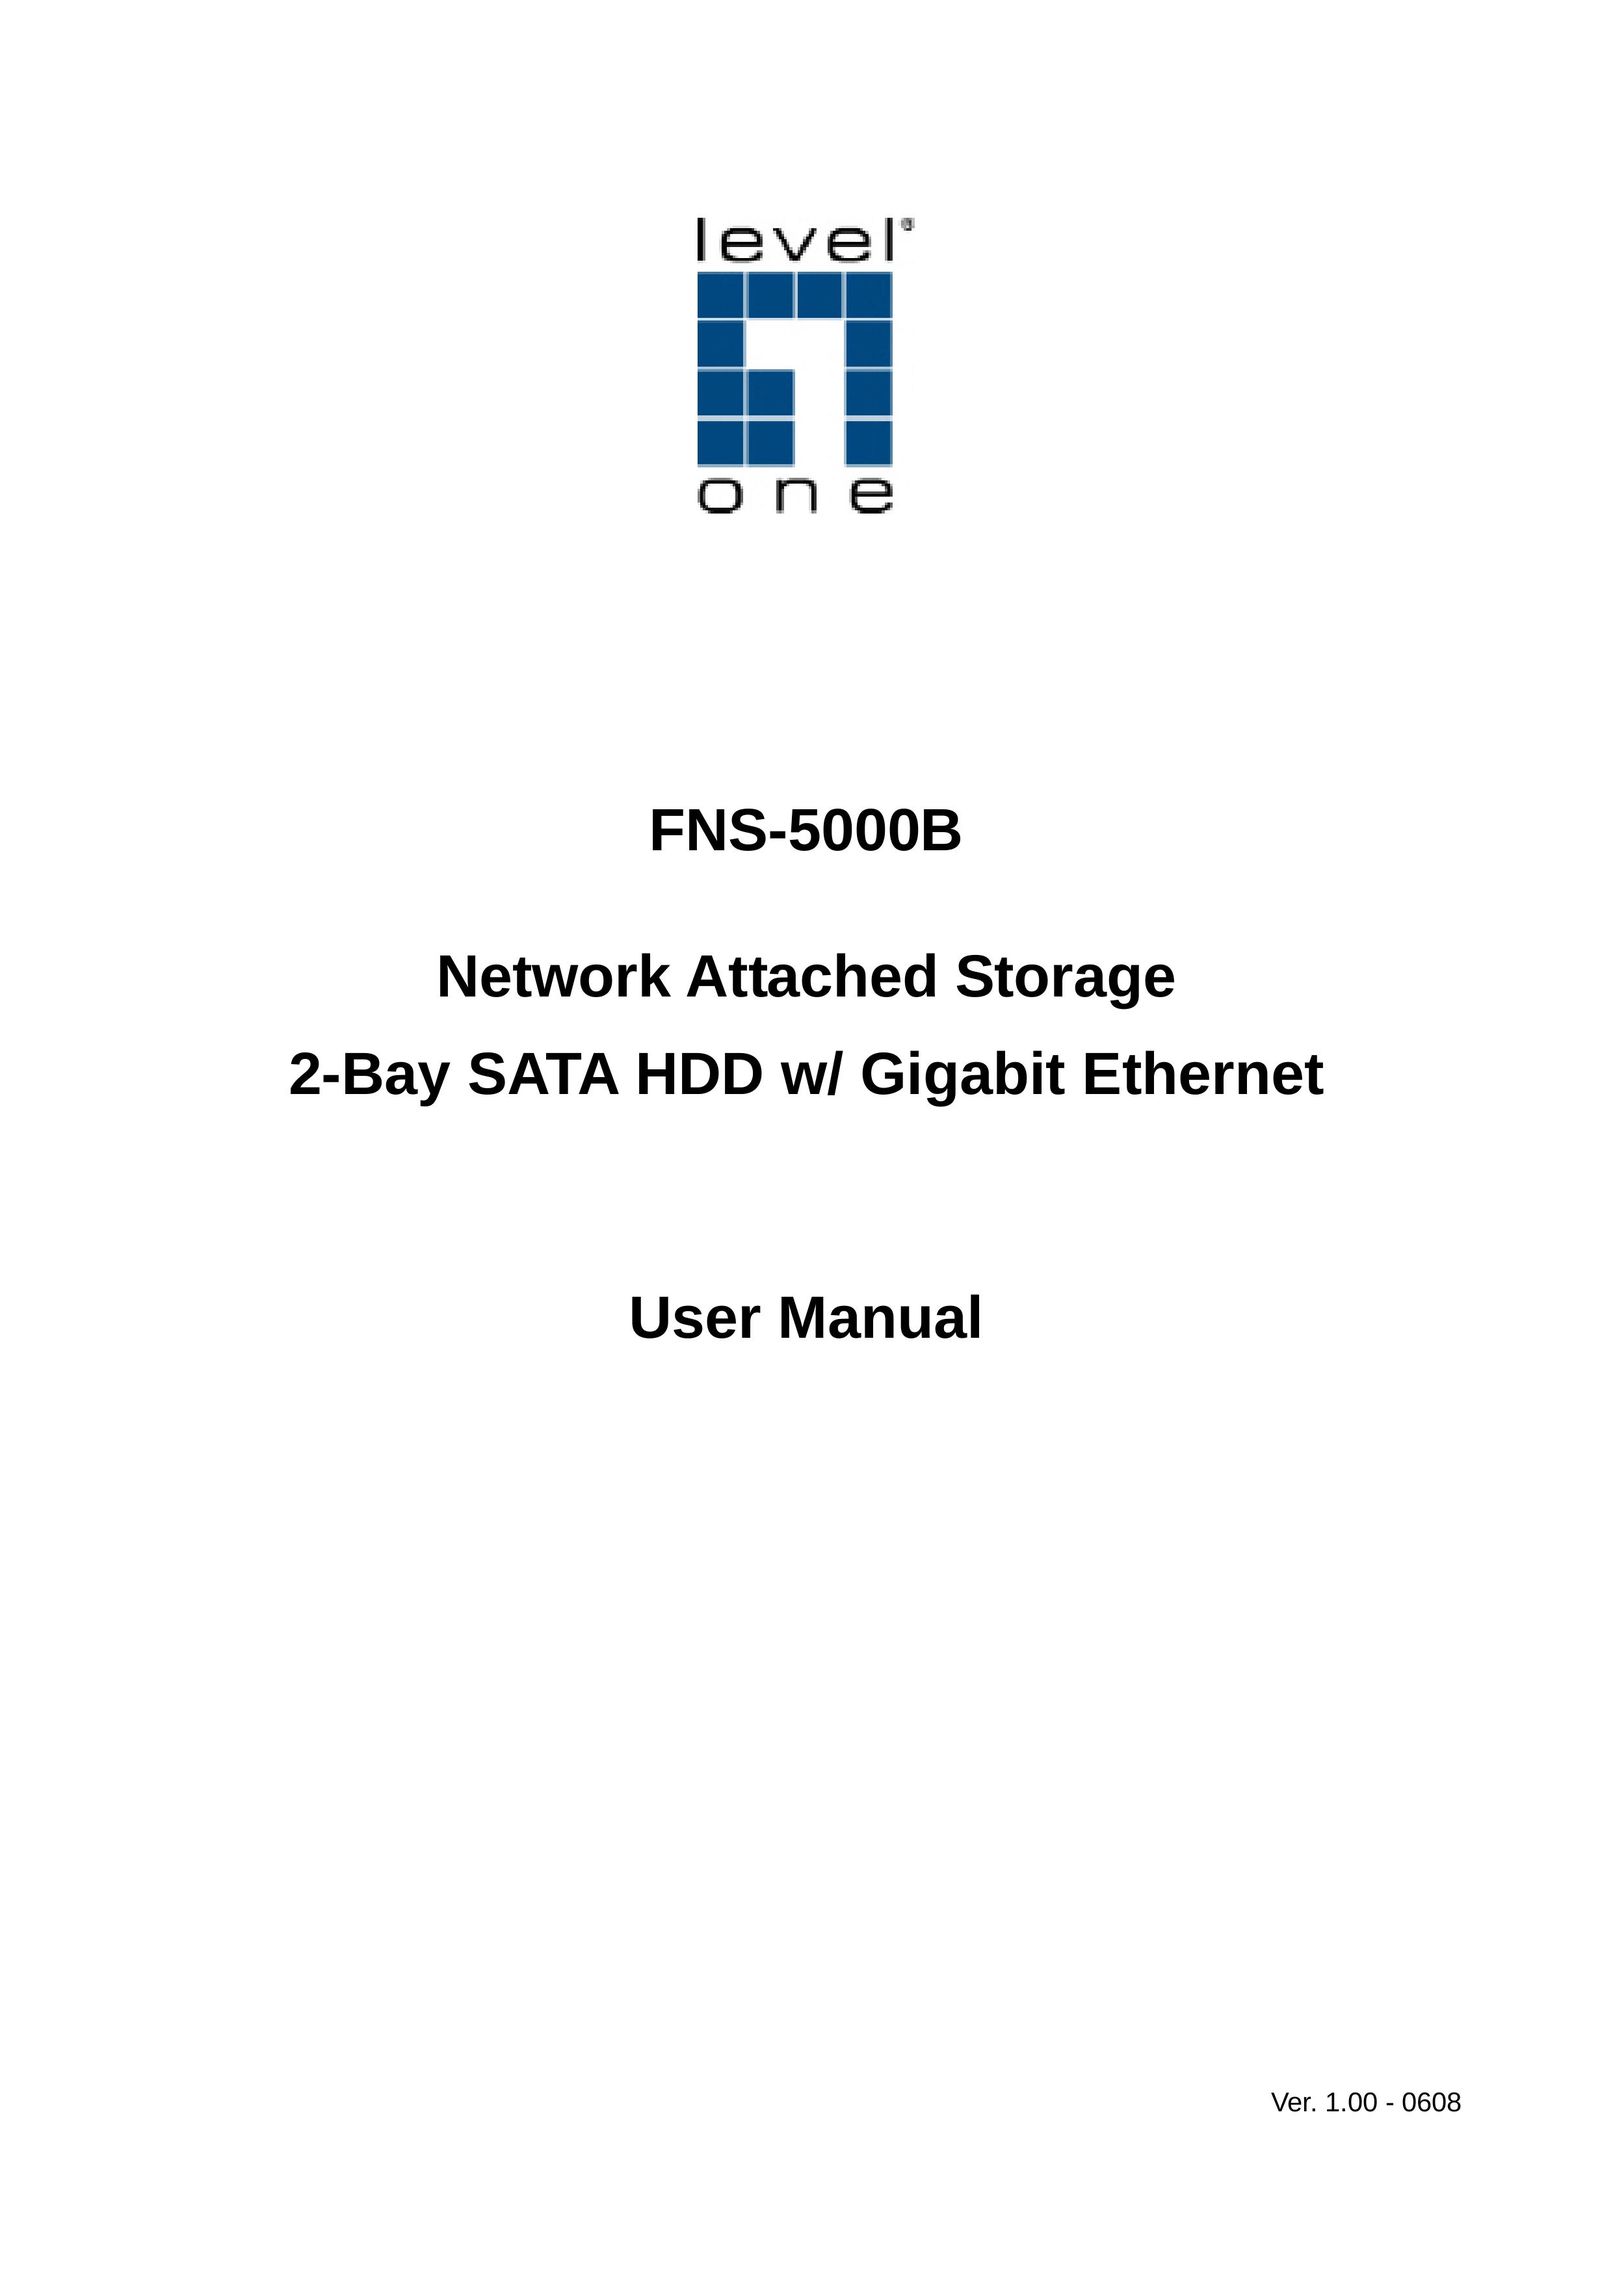 LevelOne FNS-5000B Network Card User Manual